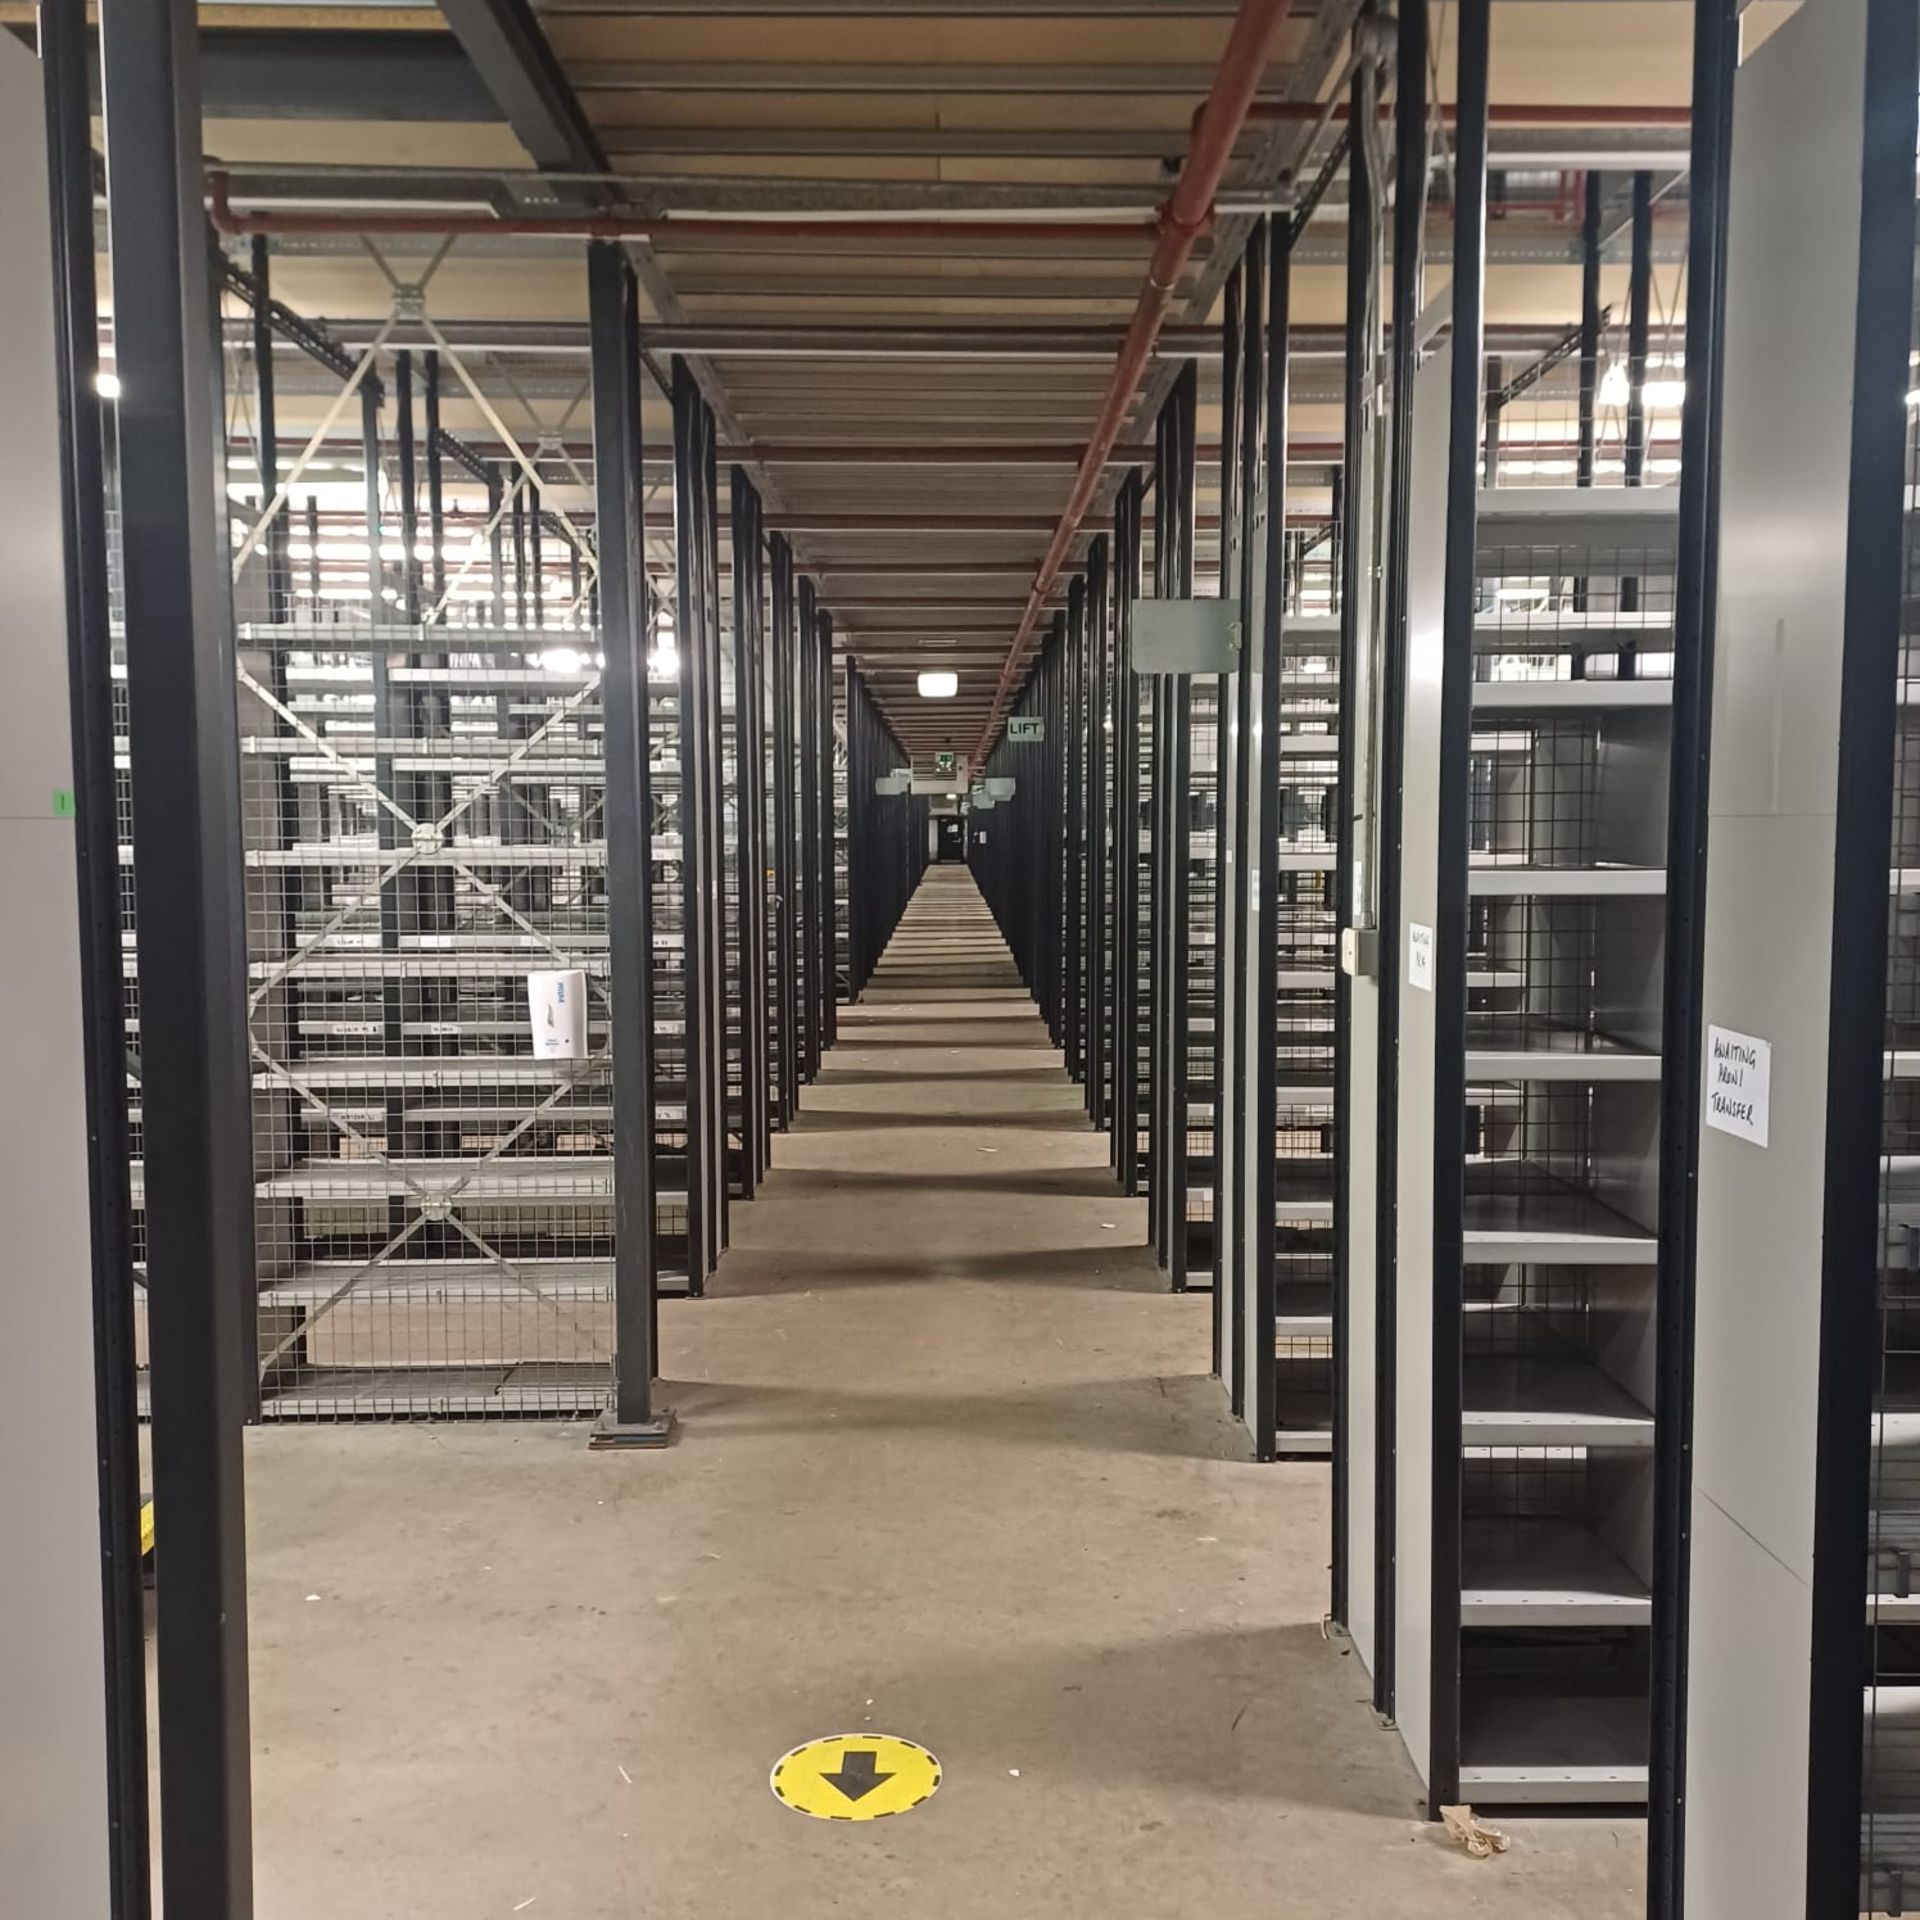 200 Bays - 3.5m height - Link 51 Shelving - 400mm depth x 1m length - Image 2 of 2